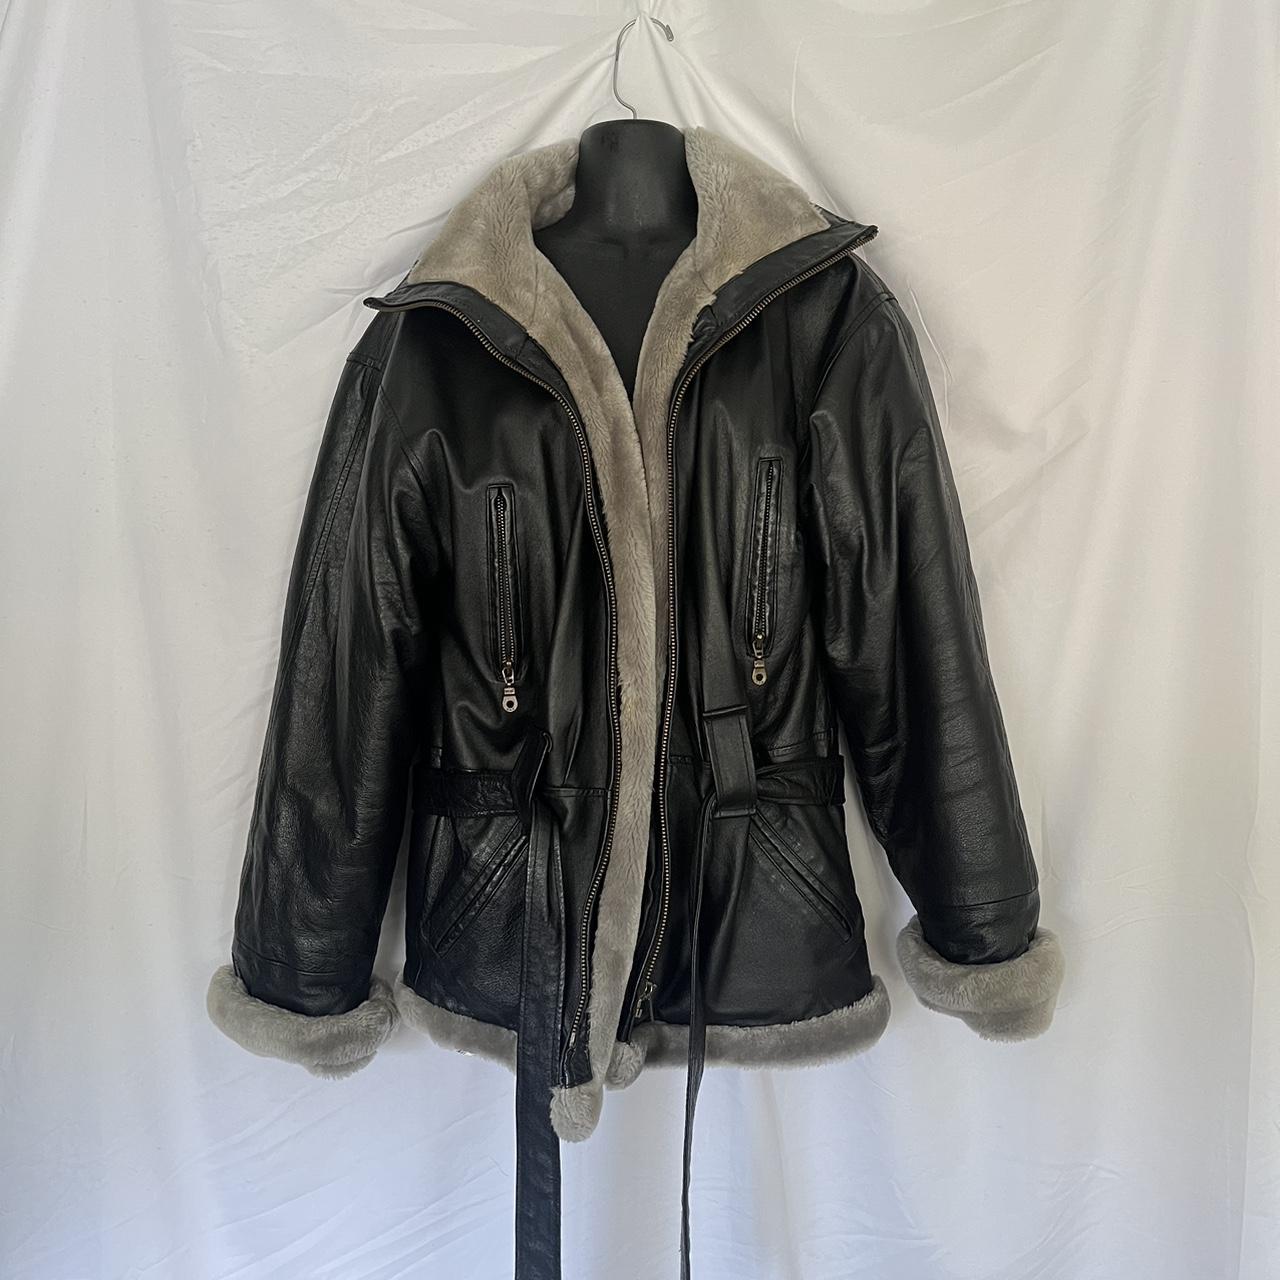 Vintage Wilda Leather Shearling Jacket lined with... - Depop